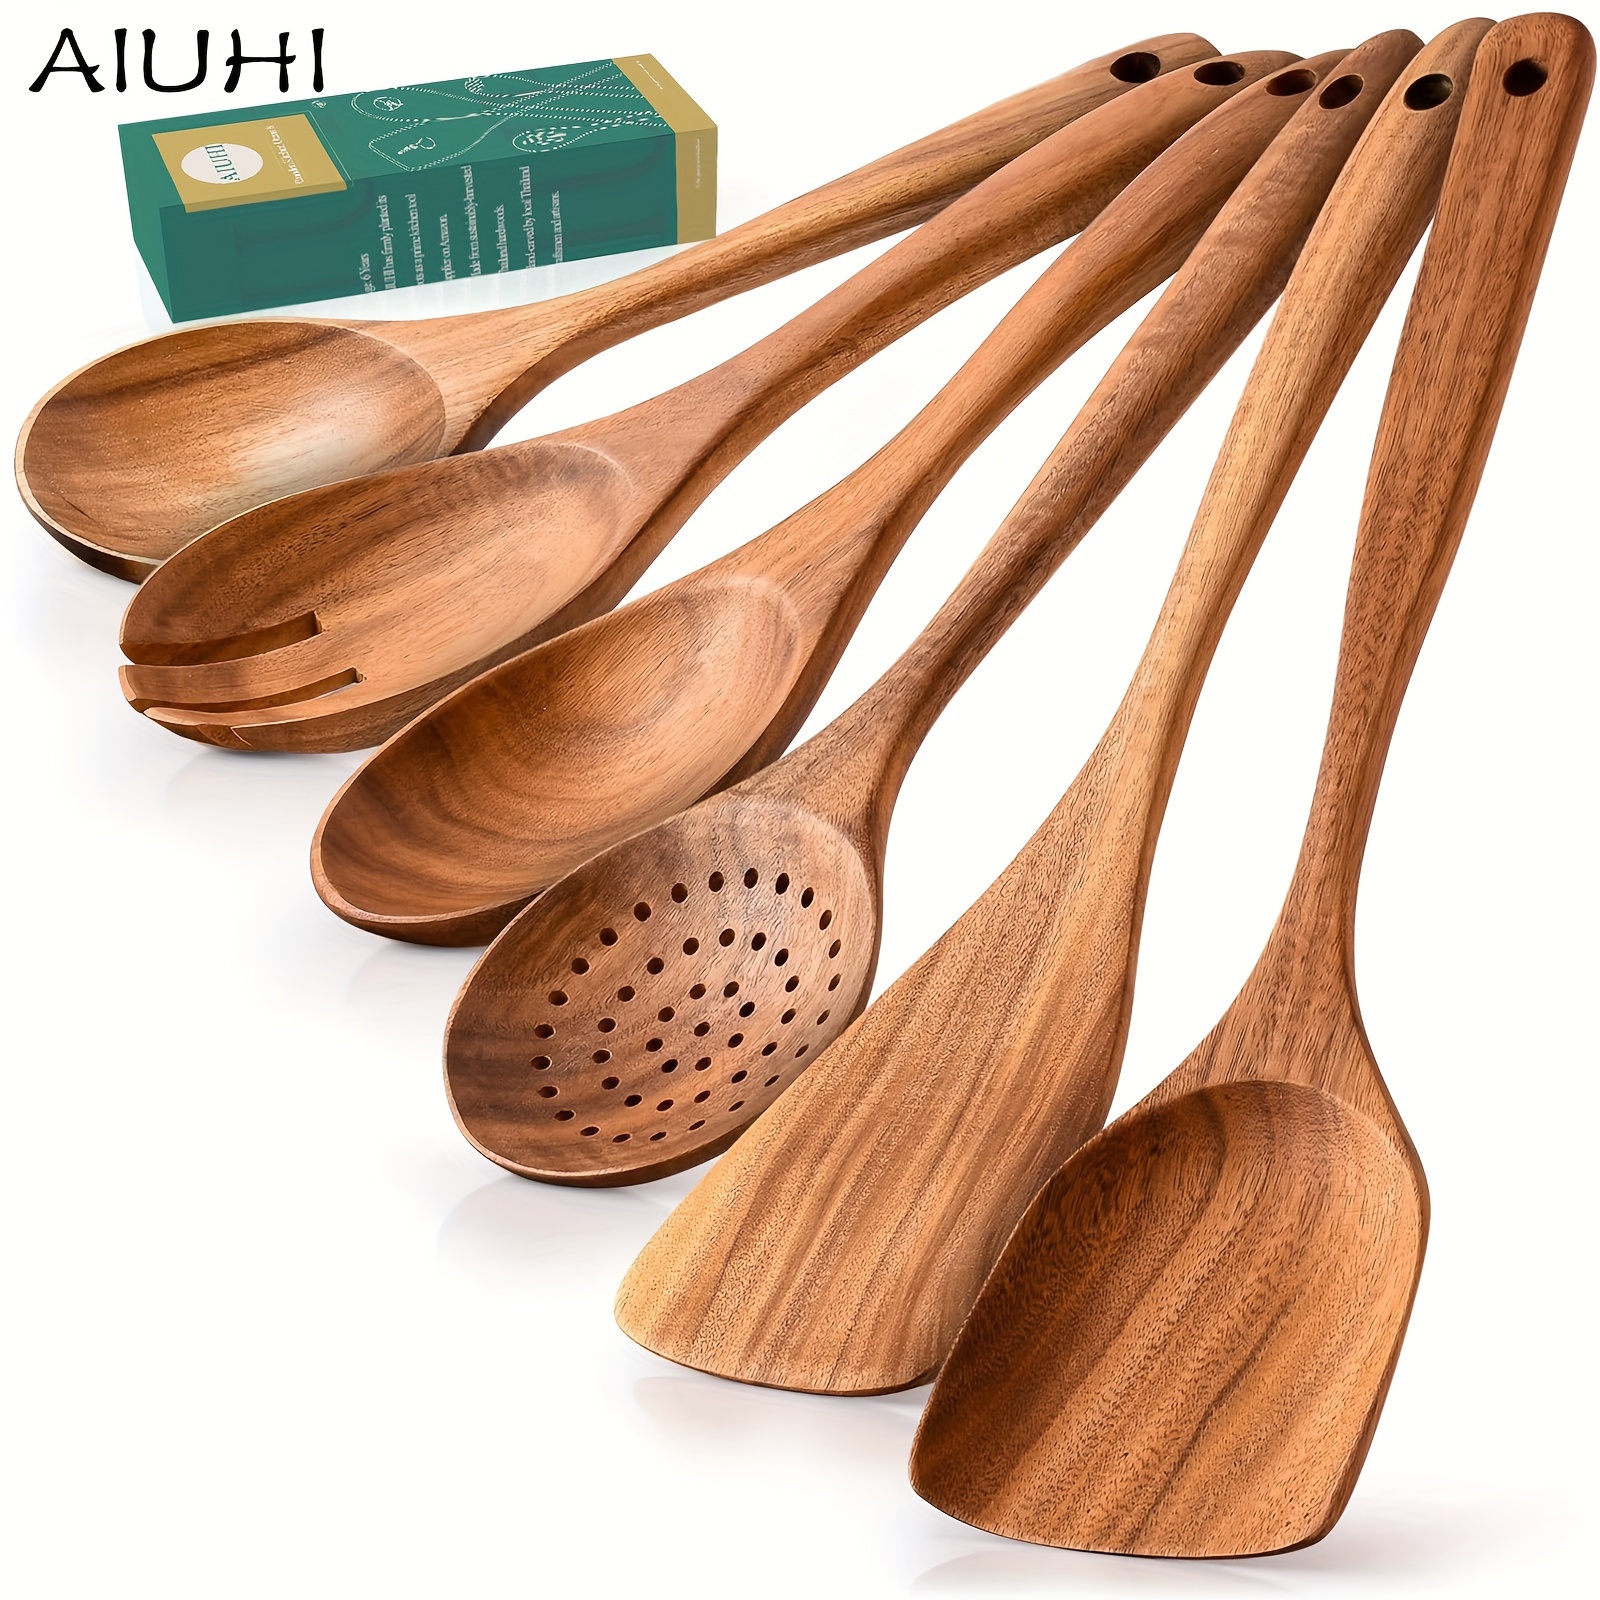 Wooden Tong and Egg Whisk Set,Kitchen Cooking Set for AIUHI Cookware for  Cooking, Baking, Frying, Grilling, Blending and Serving